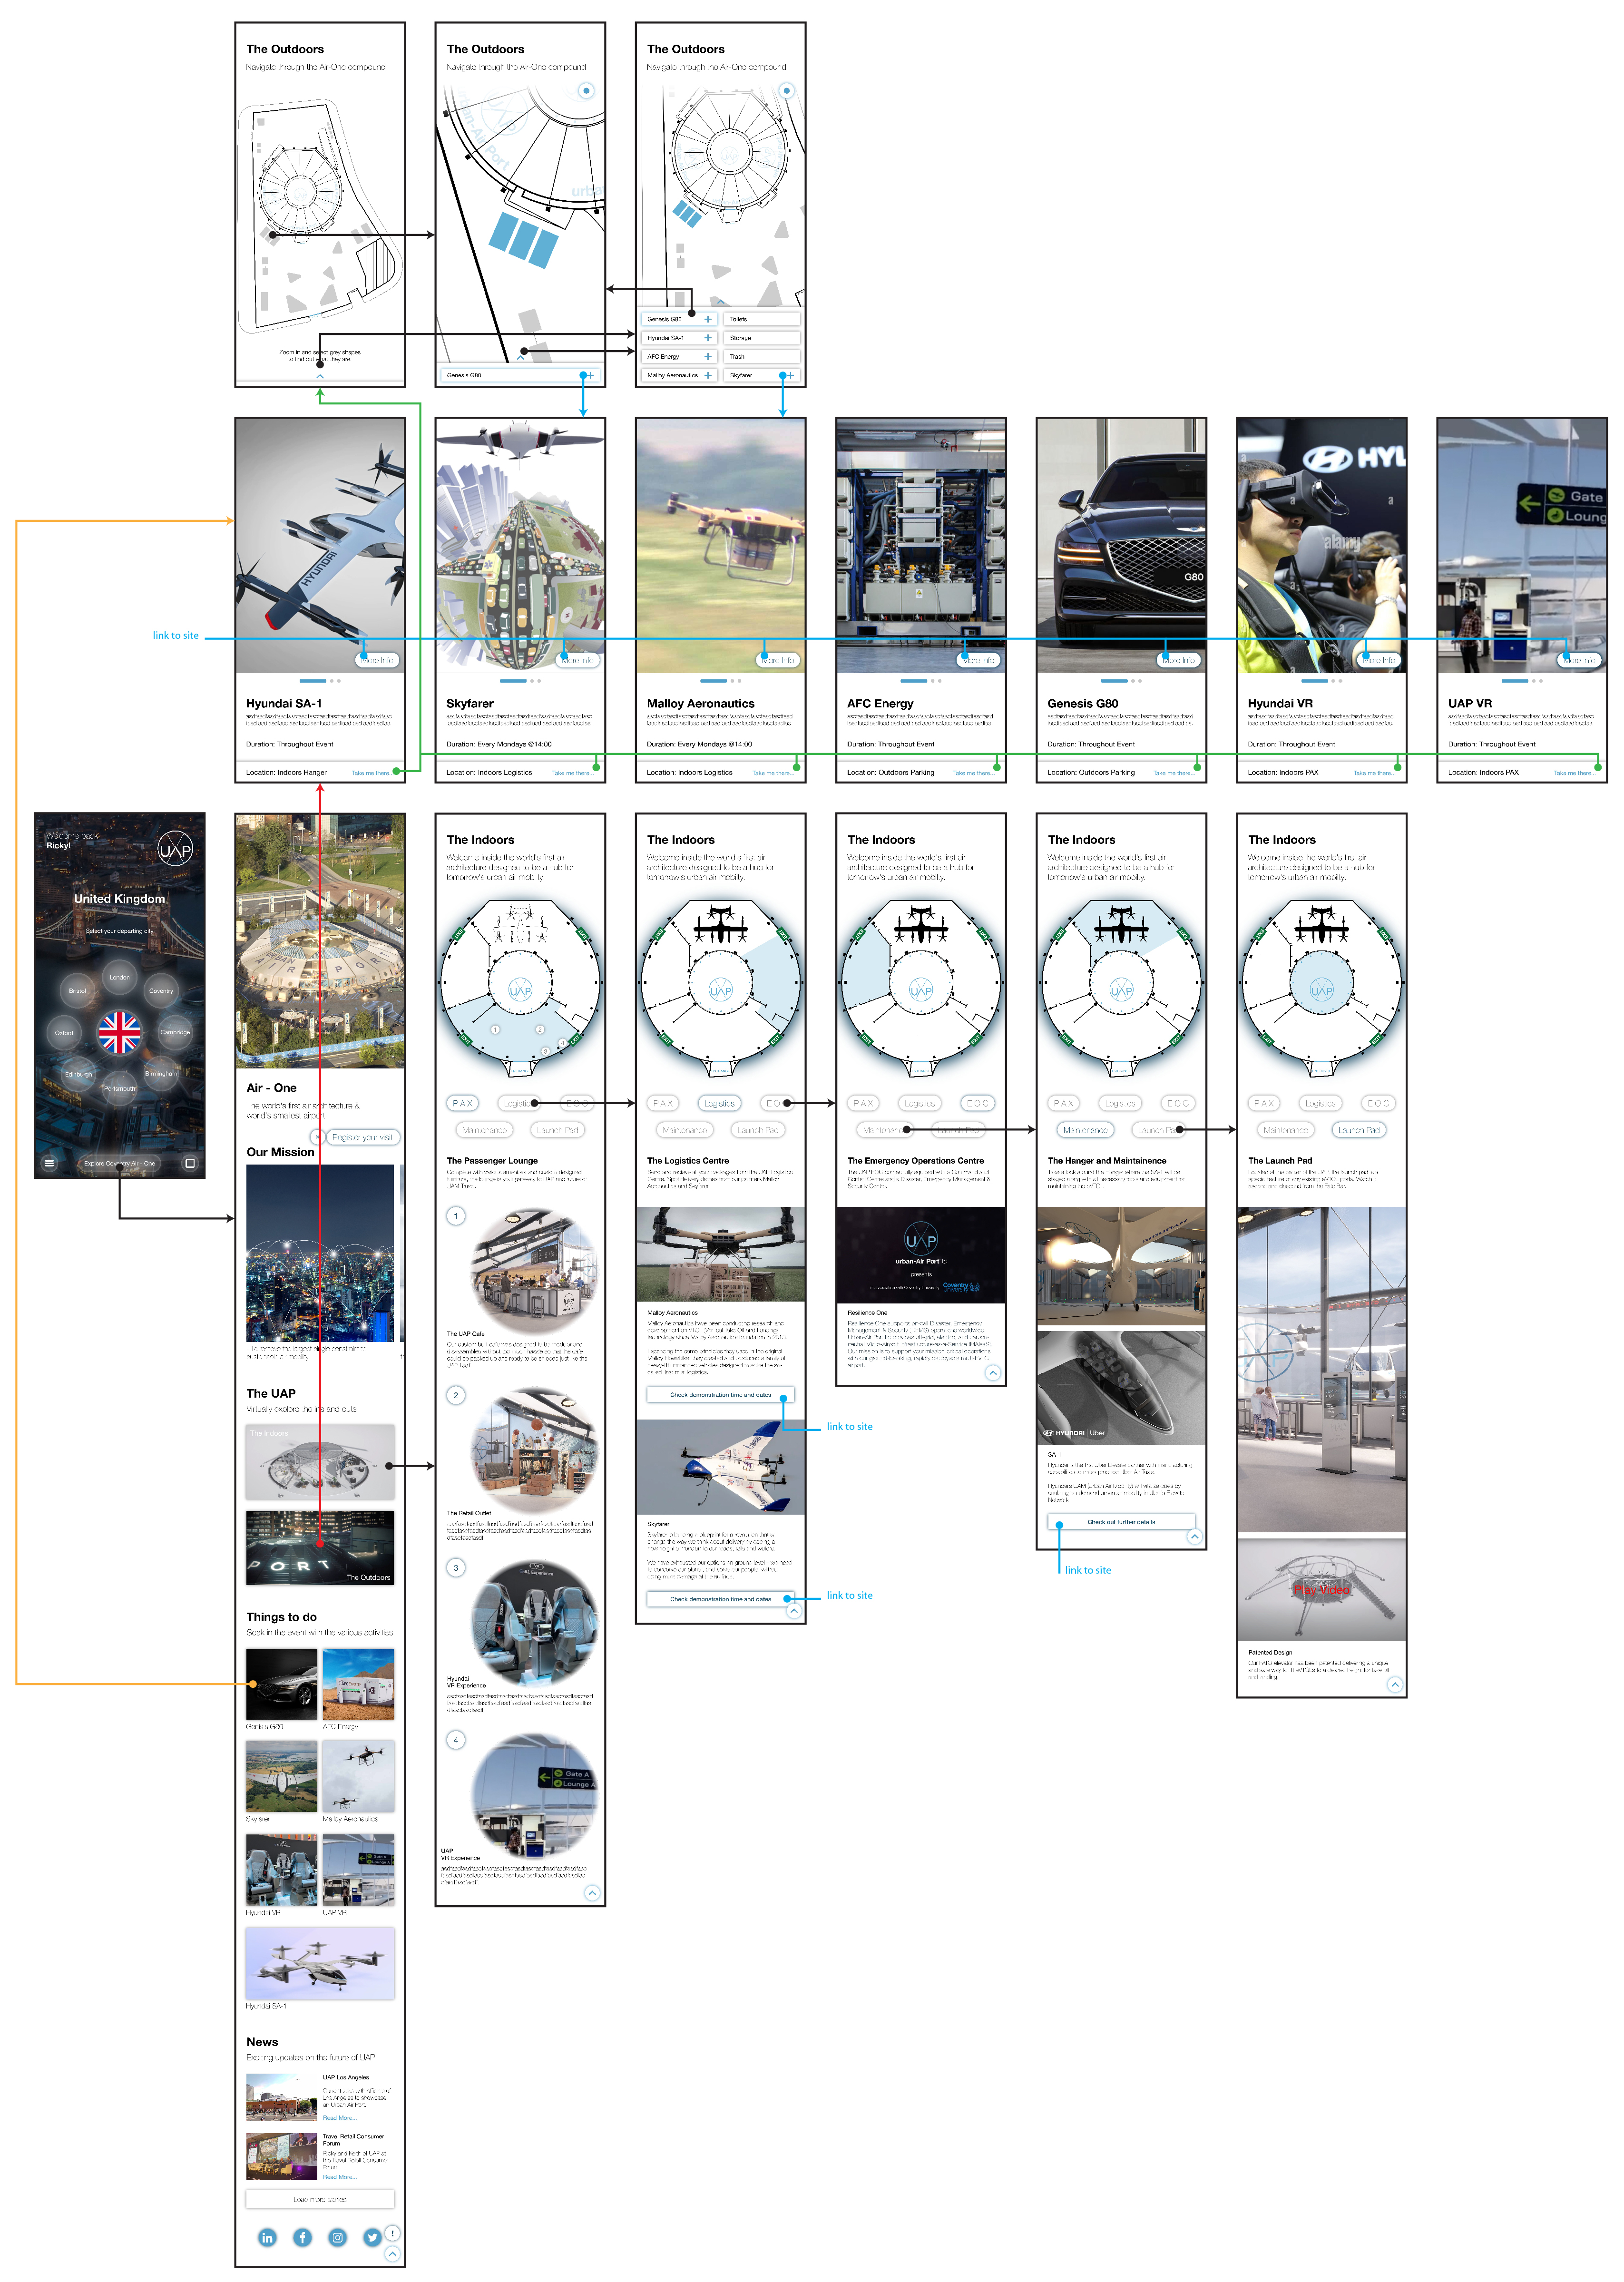 For the Coventry Air One event, the software engineer and I developed a guide that was temporarily added onto the app to help users freely explore the Urban Air Port and gain insight into the world's first vertiport